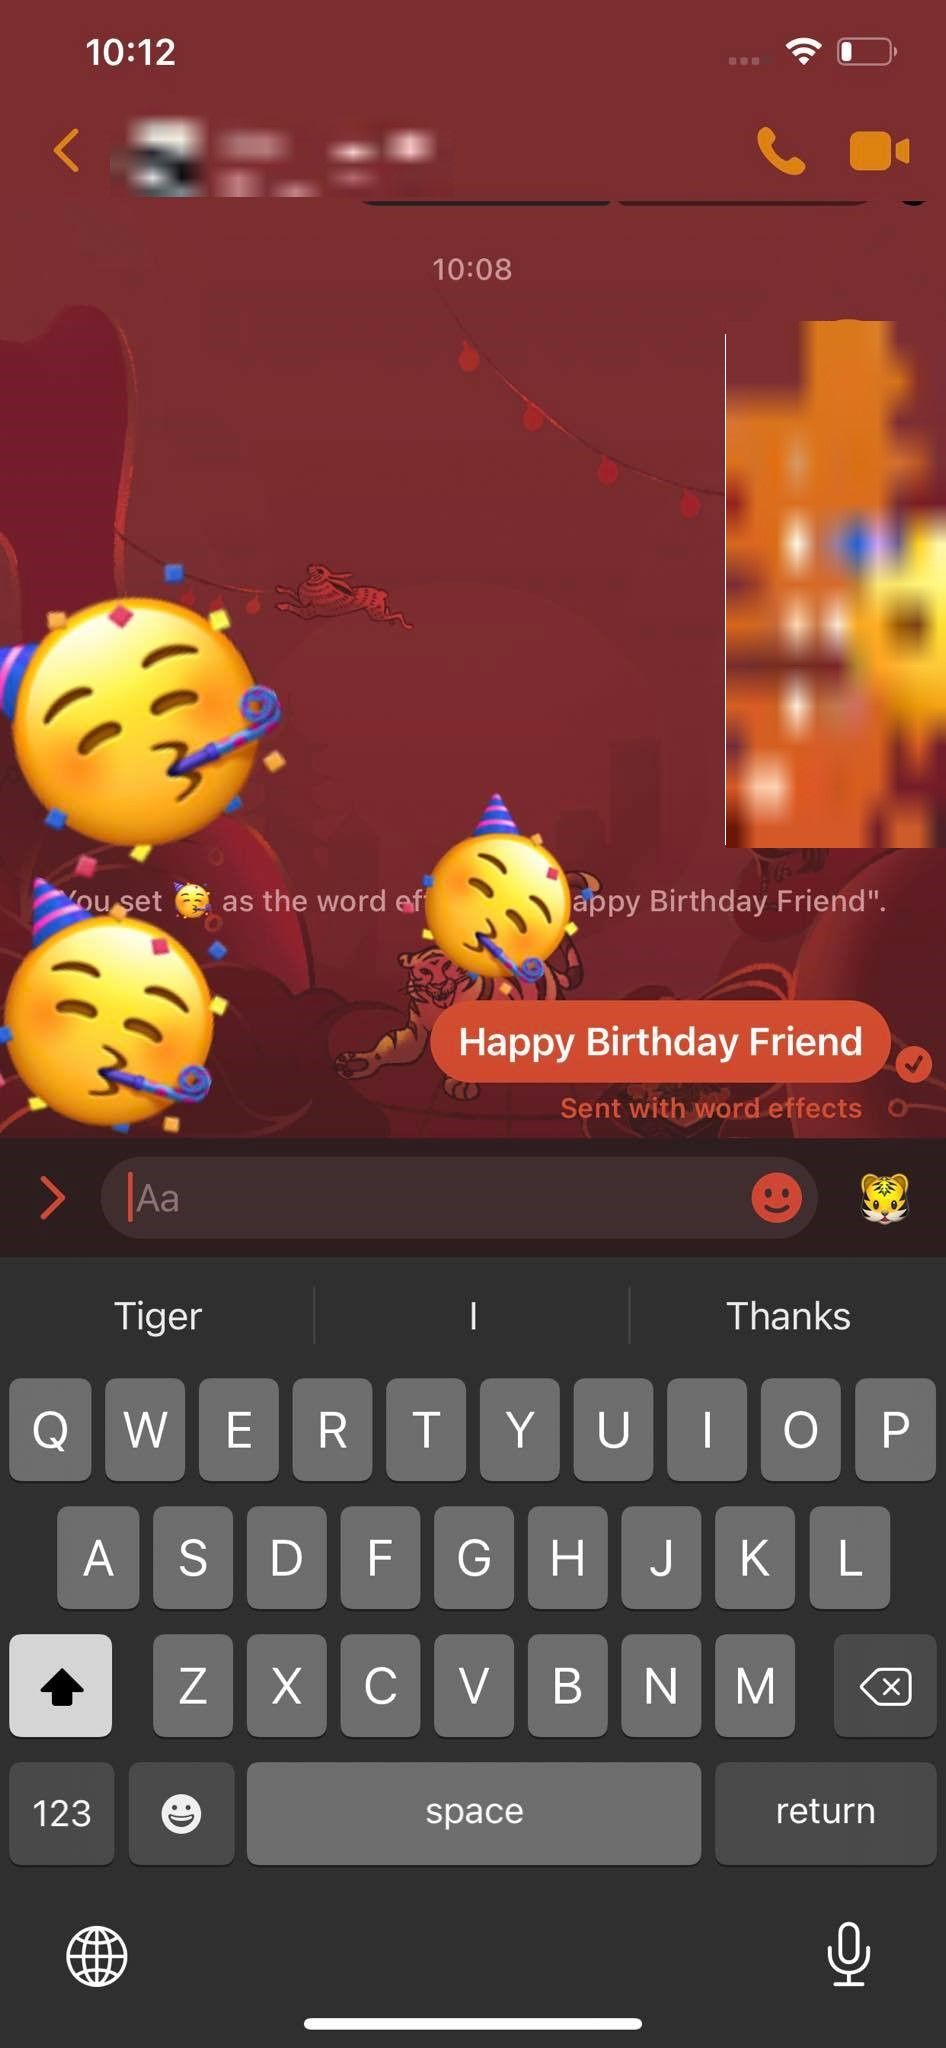 Using a New Custom Word Effect in the Facebook Messenger